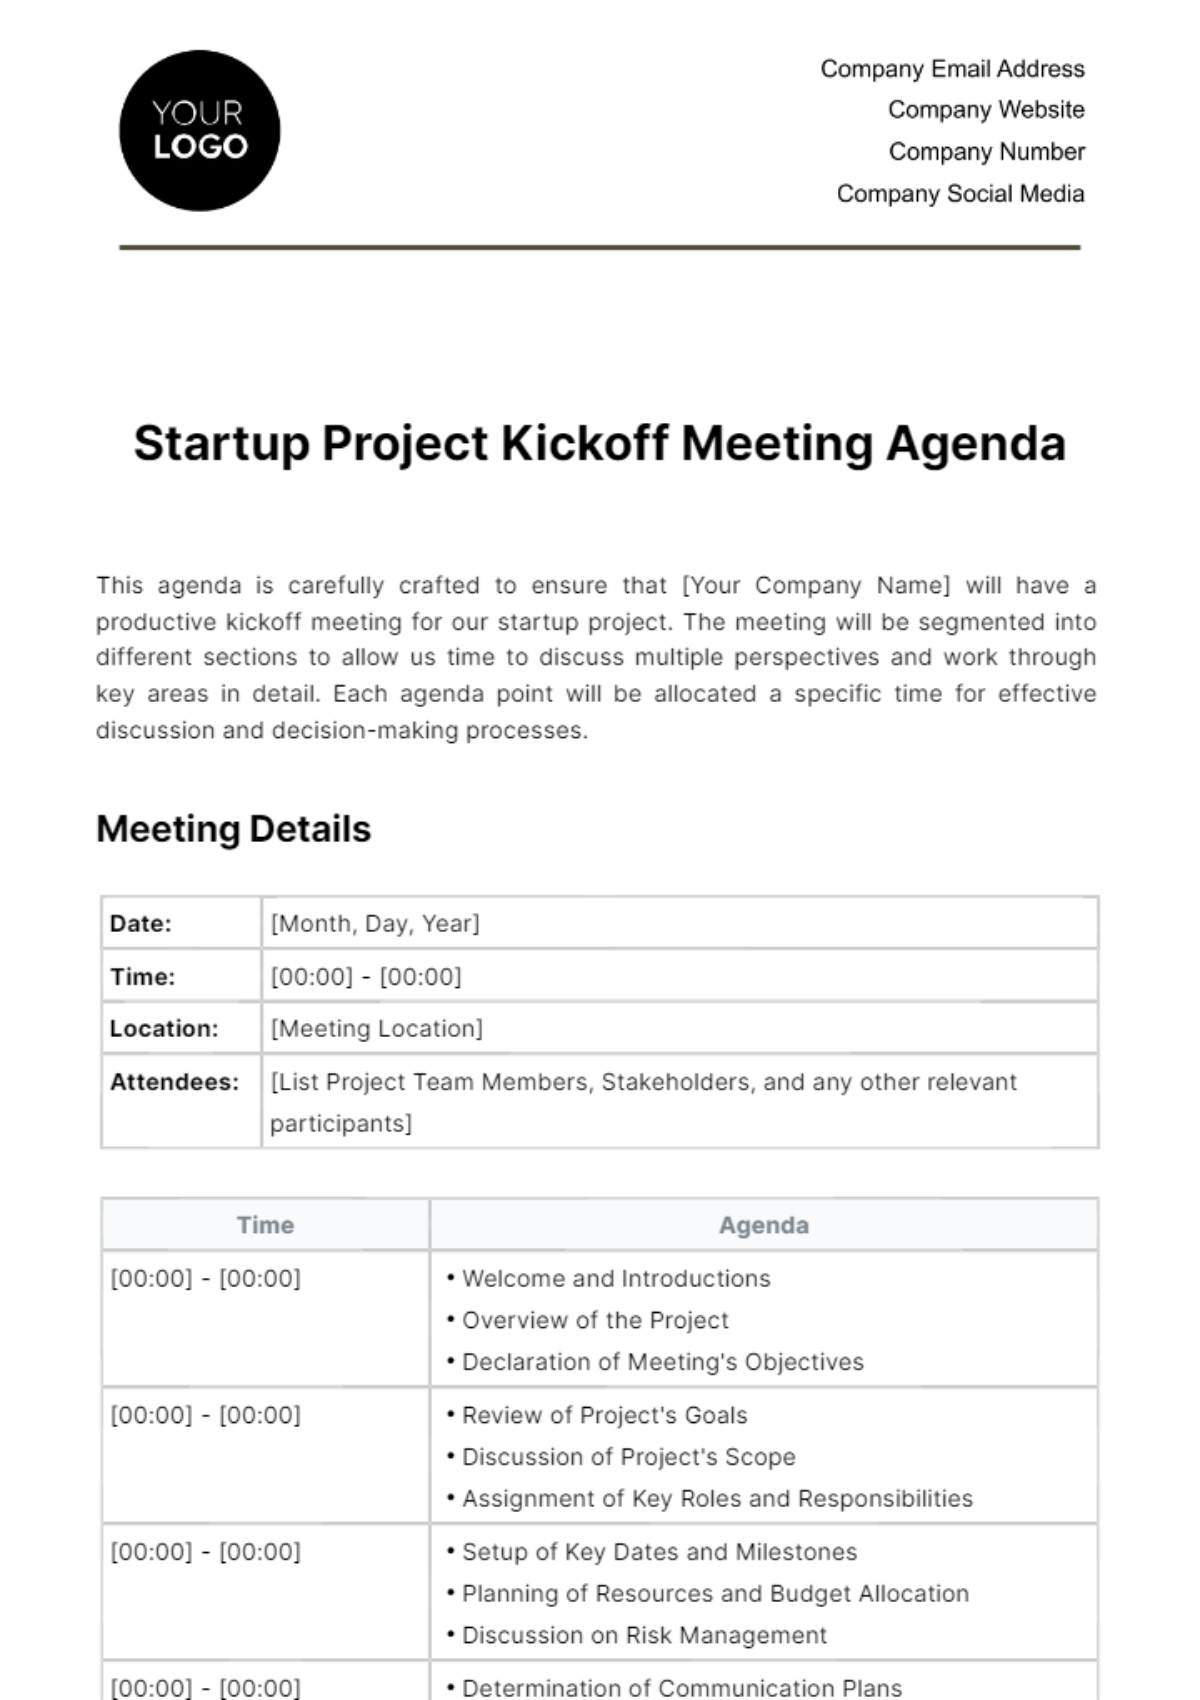 Free Startup Project Kickoff Meeting Agenda Template